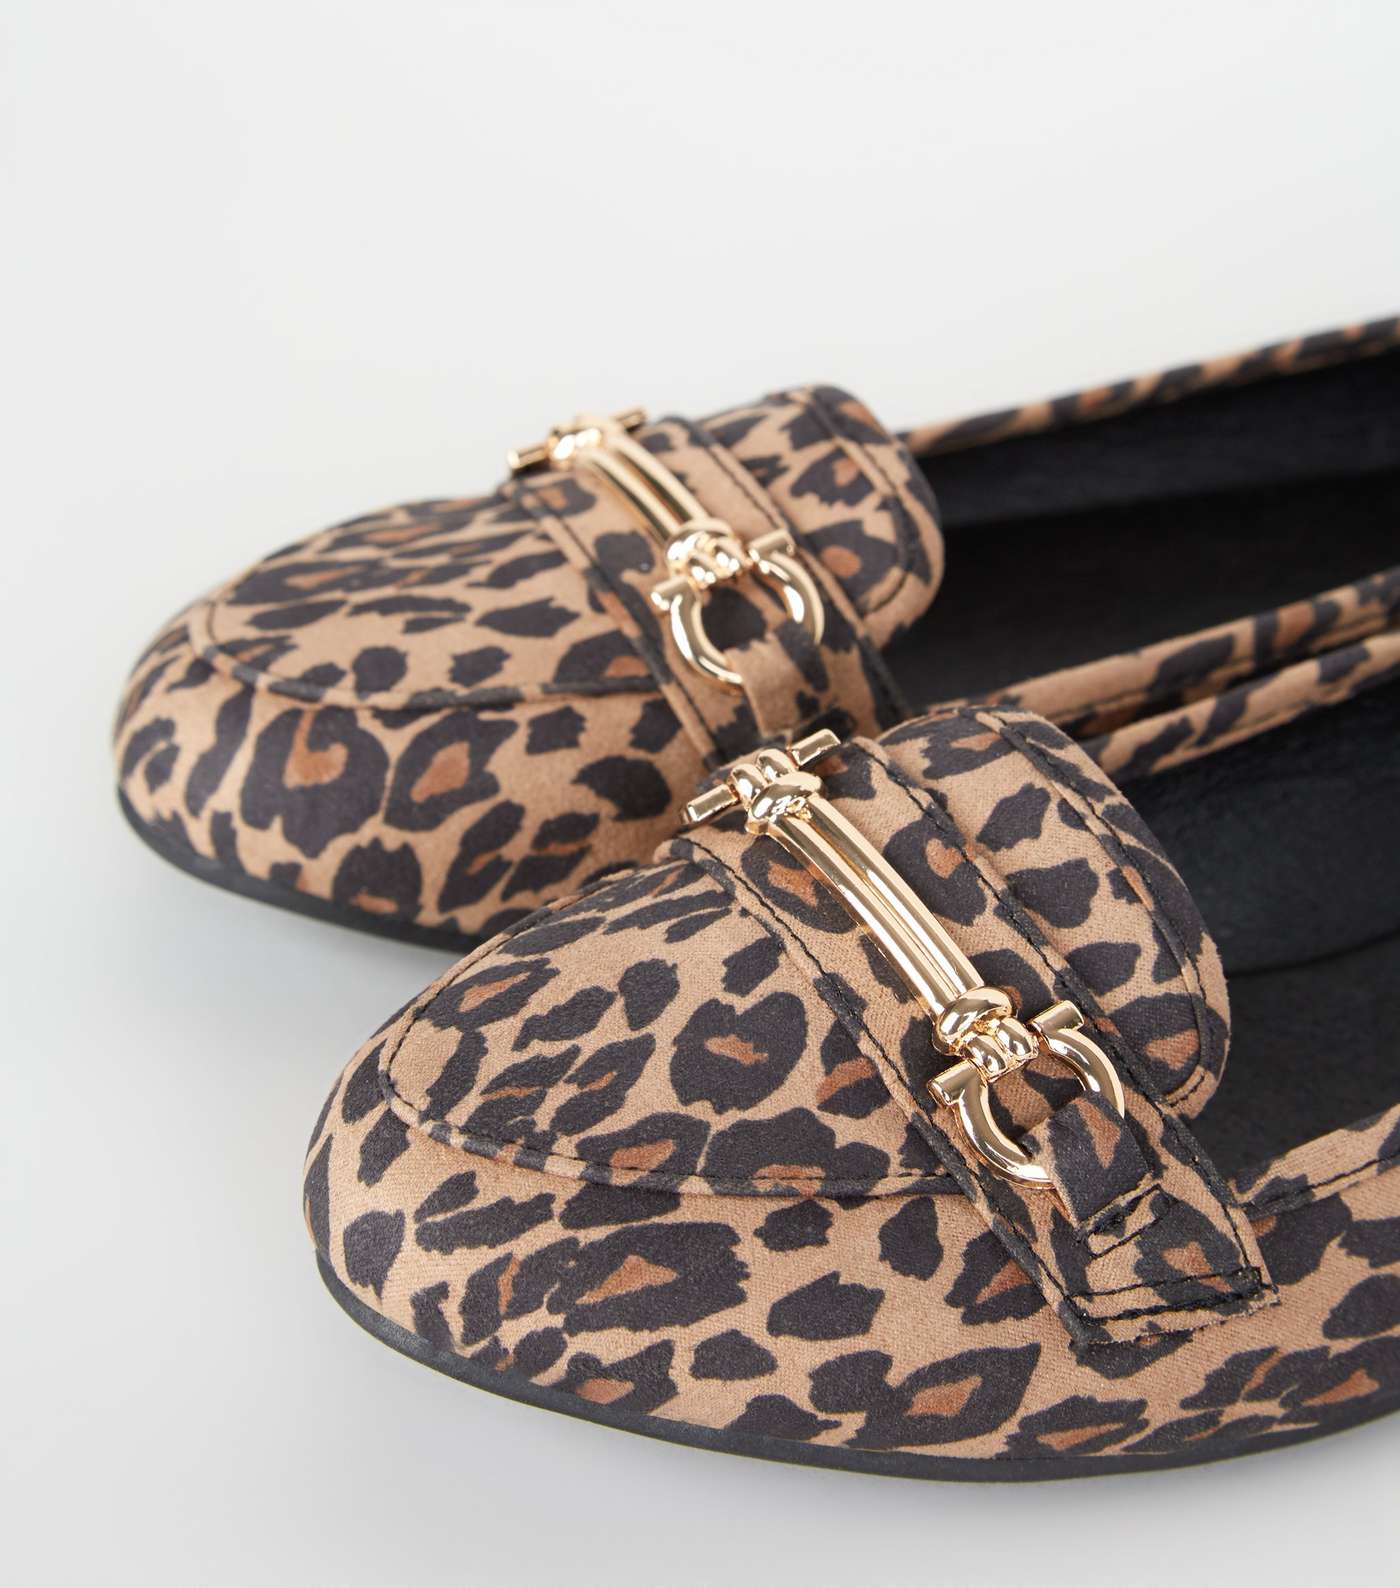 Stone Leopard Print Bar Front Loafers Image 4